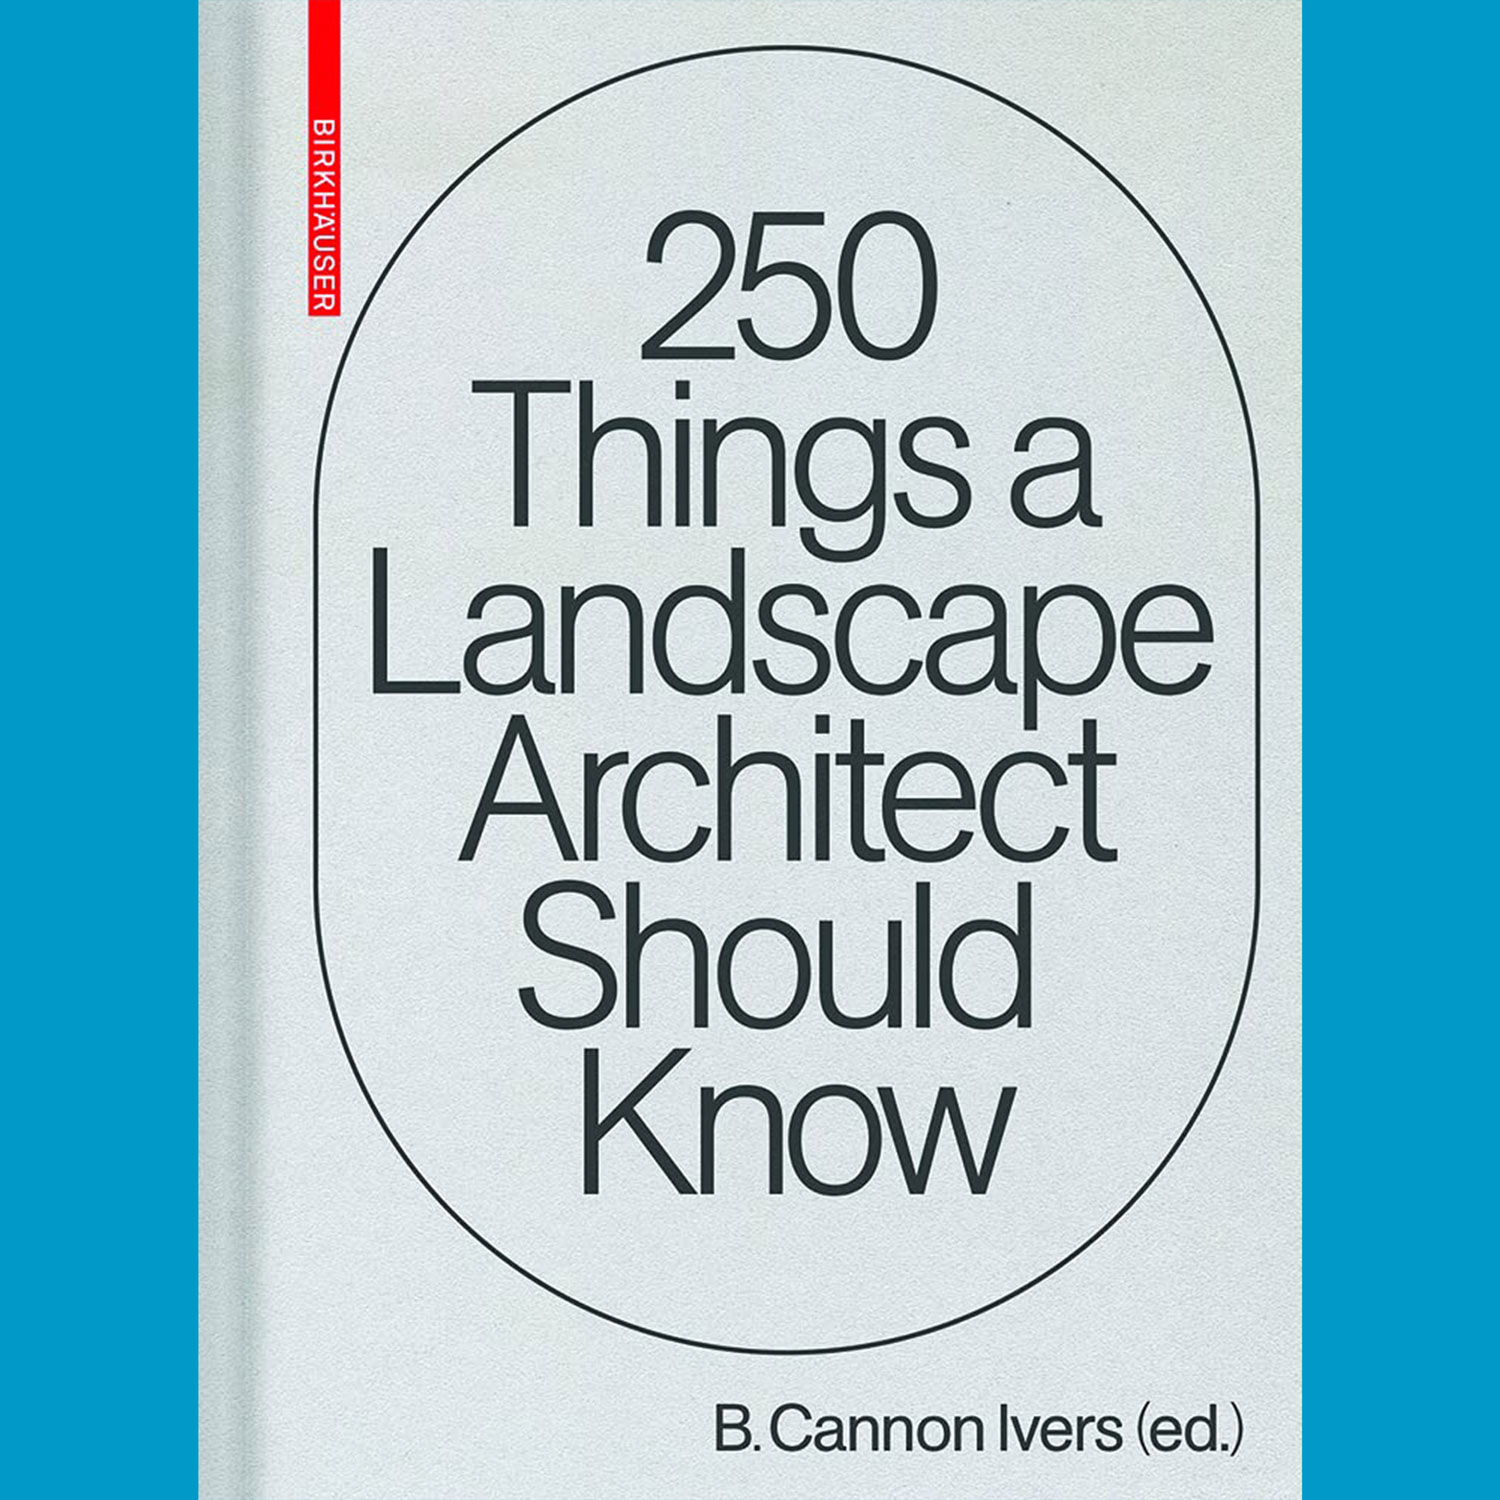 100 Architects in 250 Things a Landscape Architect should know